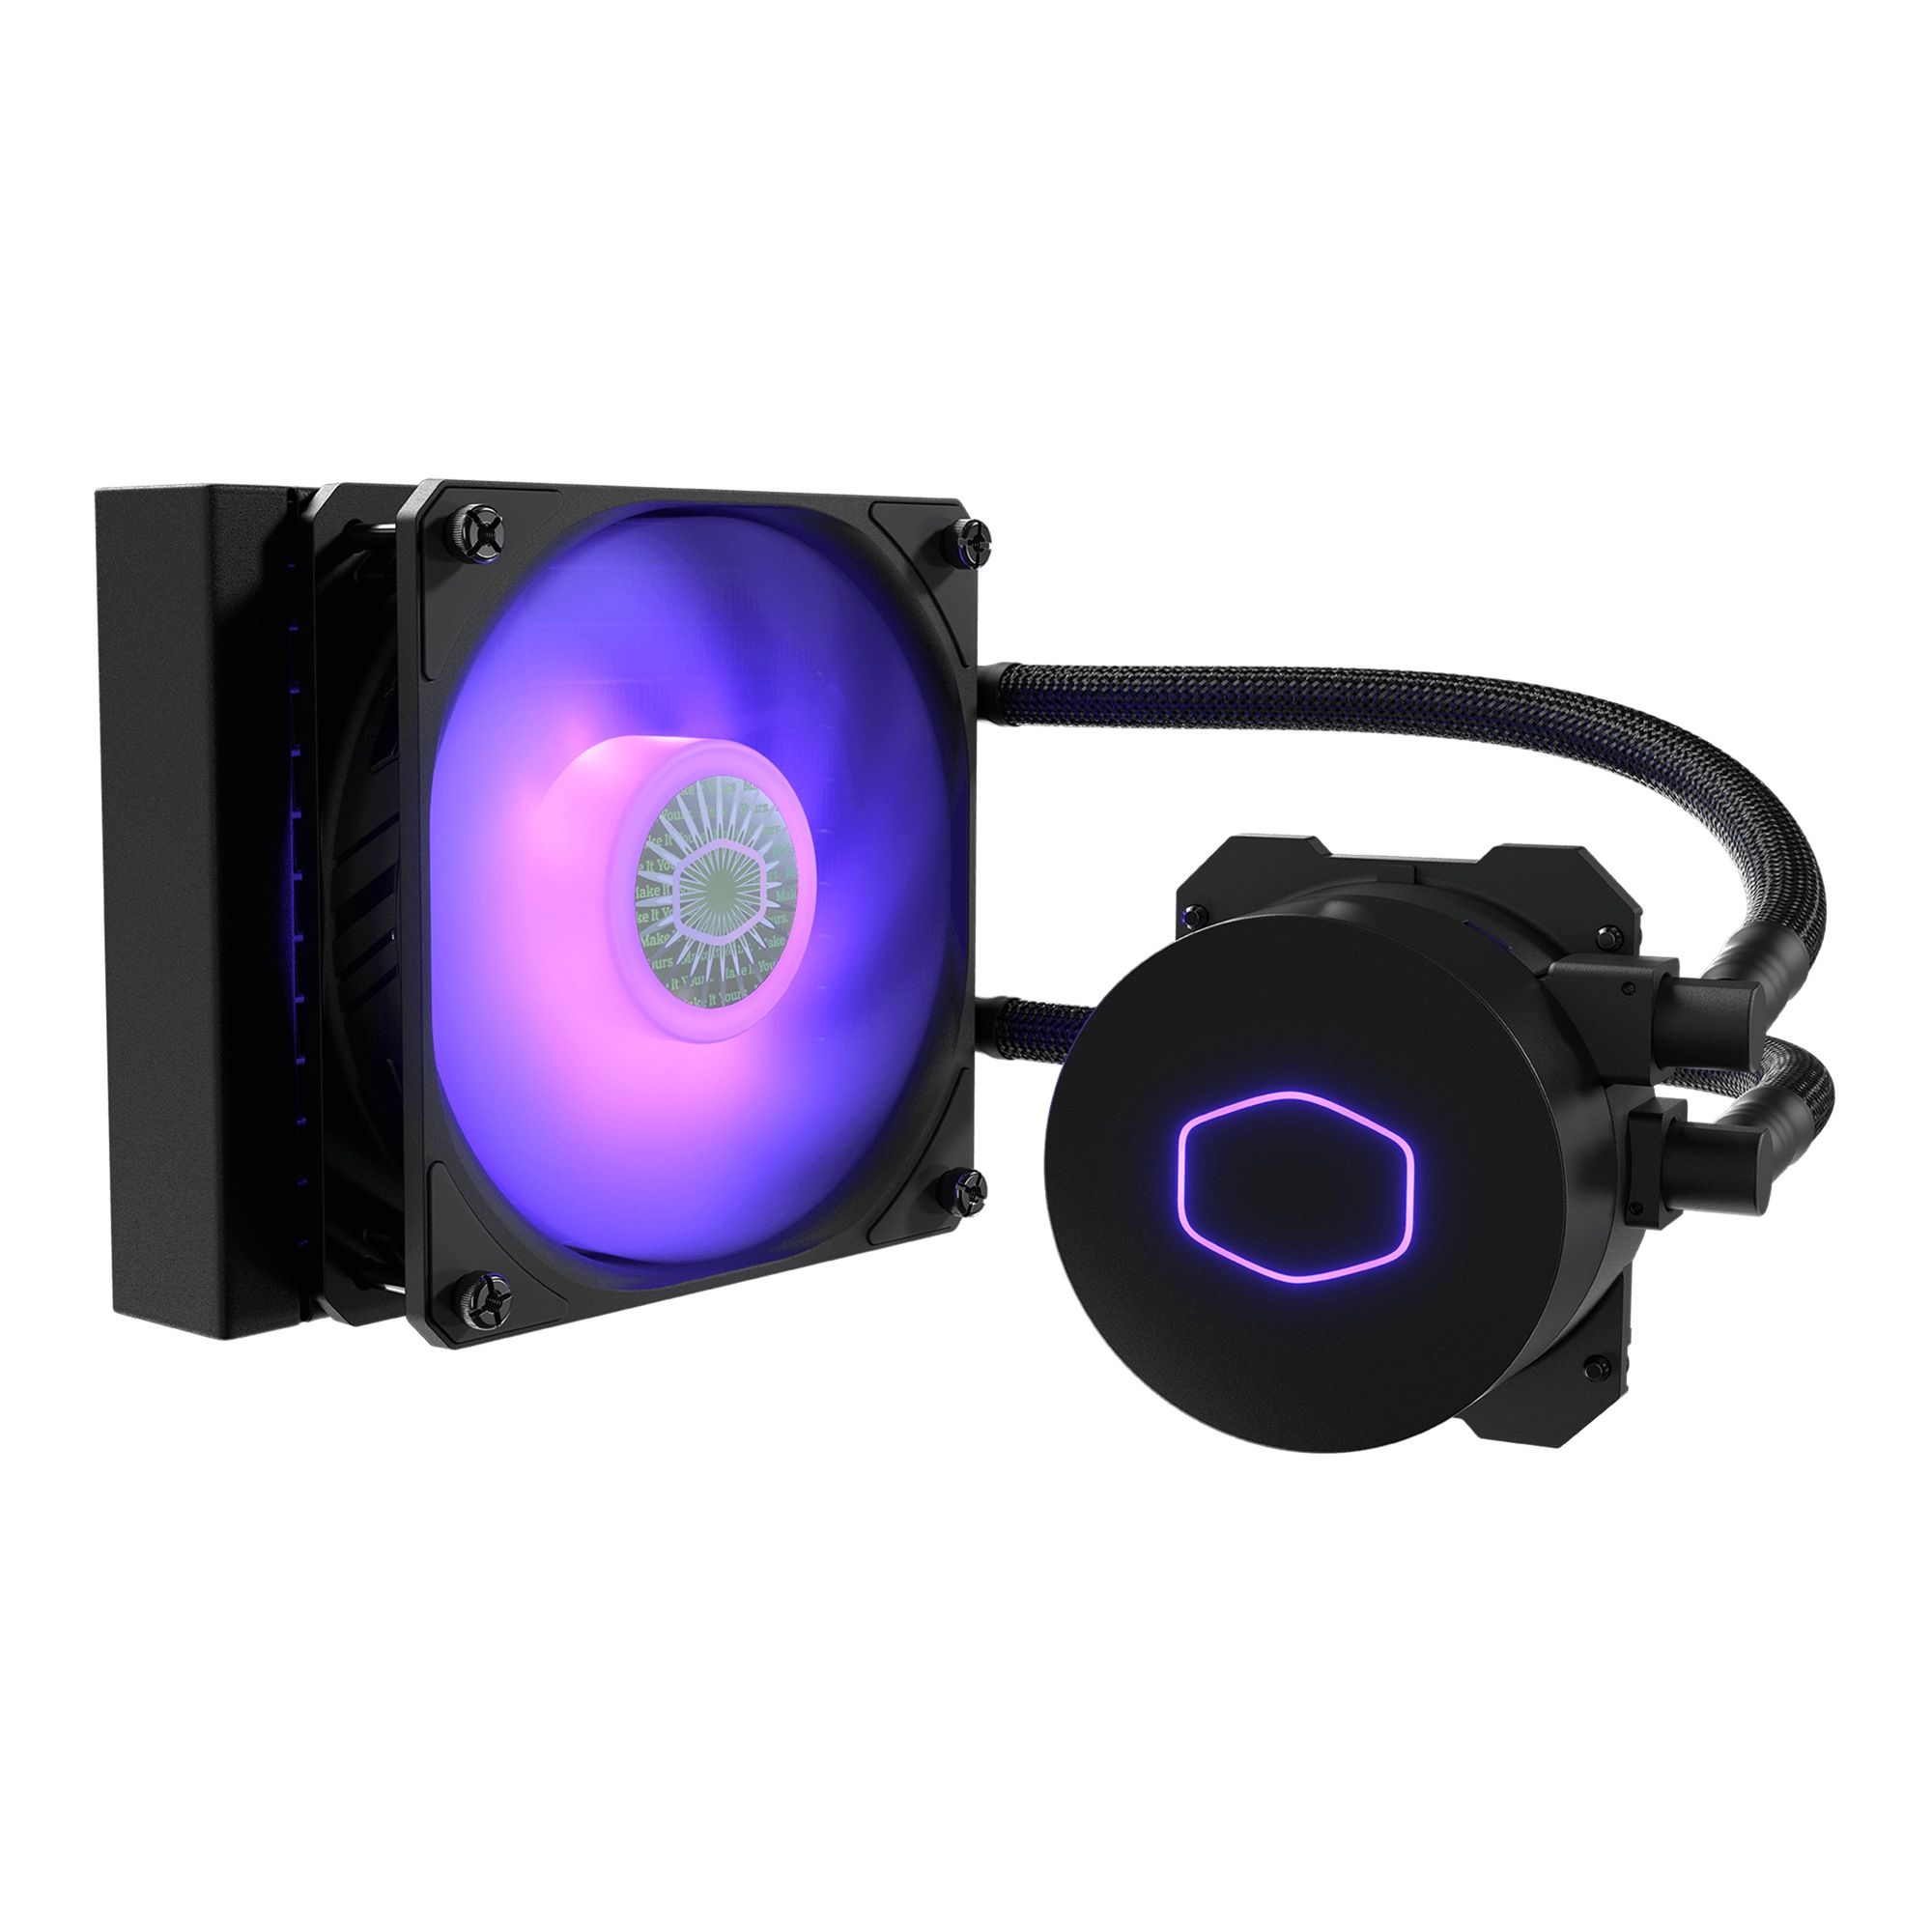 COOLER COOLER MASTER, skt. universal, racire cu lichid, vent. 120 mm, 1800 rpm, LED RGB ,"MLW-D12M-A18PC-R2" (include TV 0.8 lei) thumb